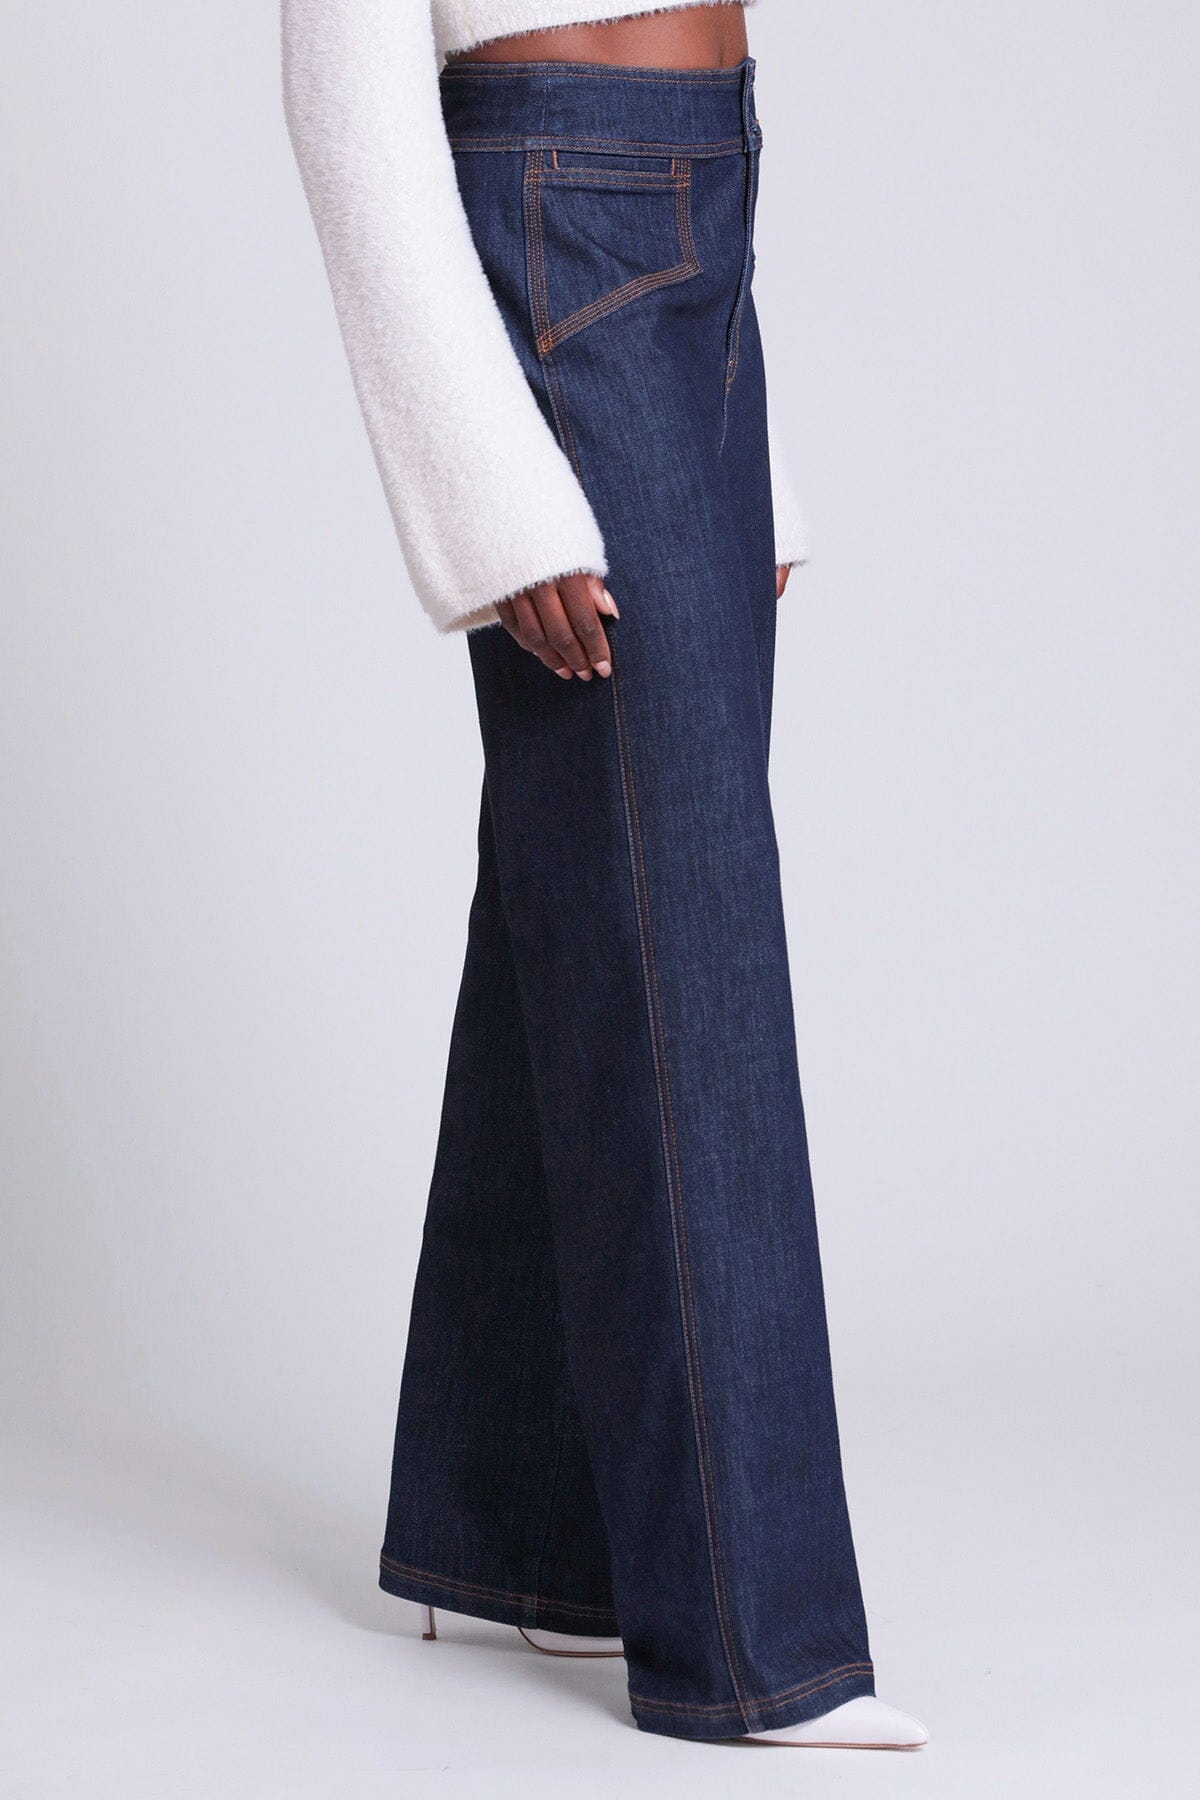 Dark wash blue high rise wide leg denim trouser - women's figure flattering day to night jeans trousers for fall 2023